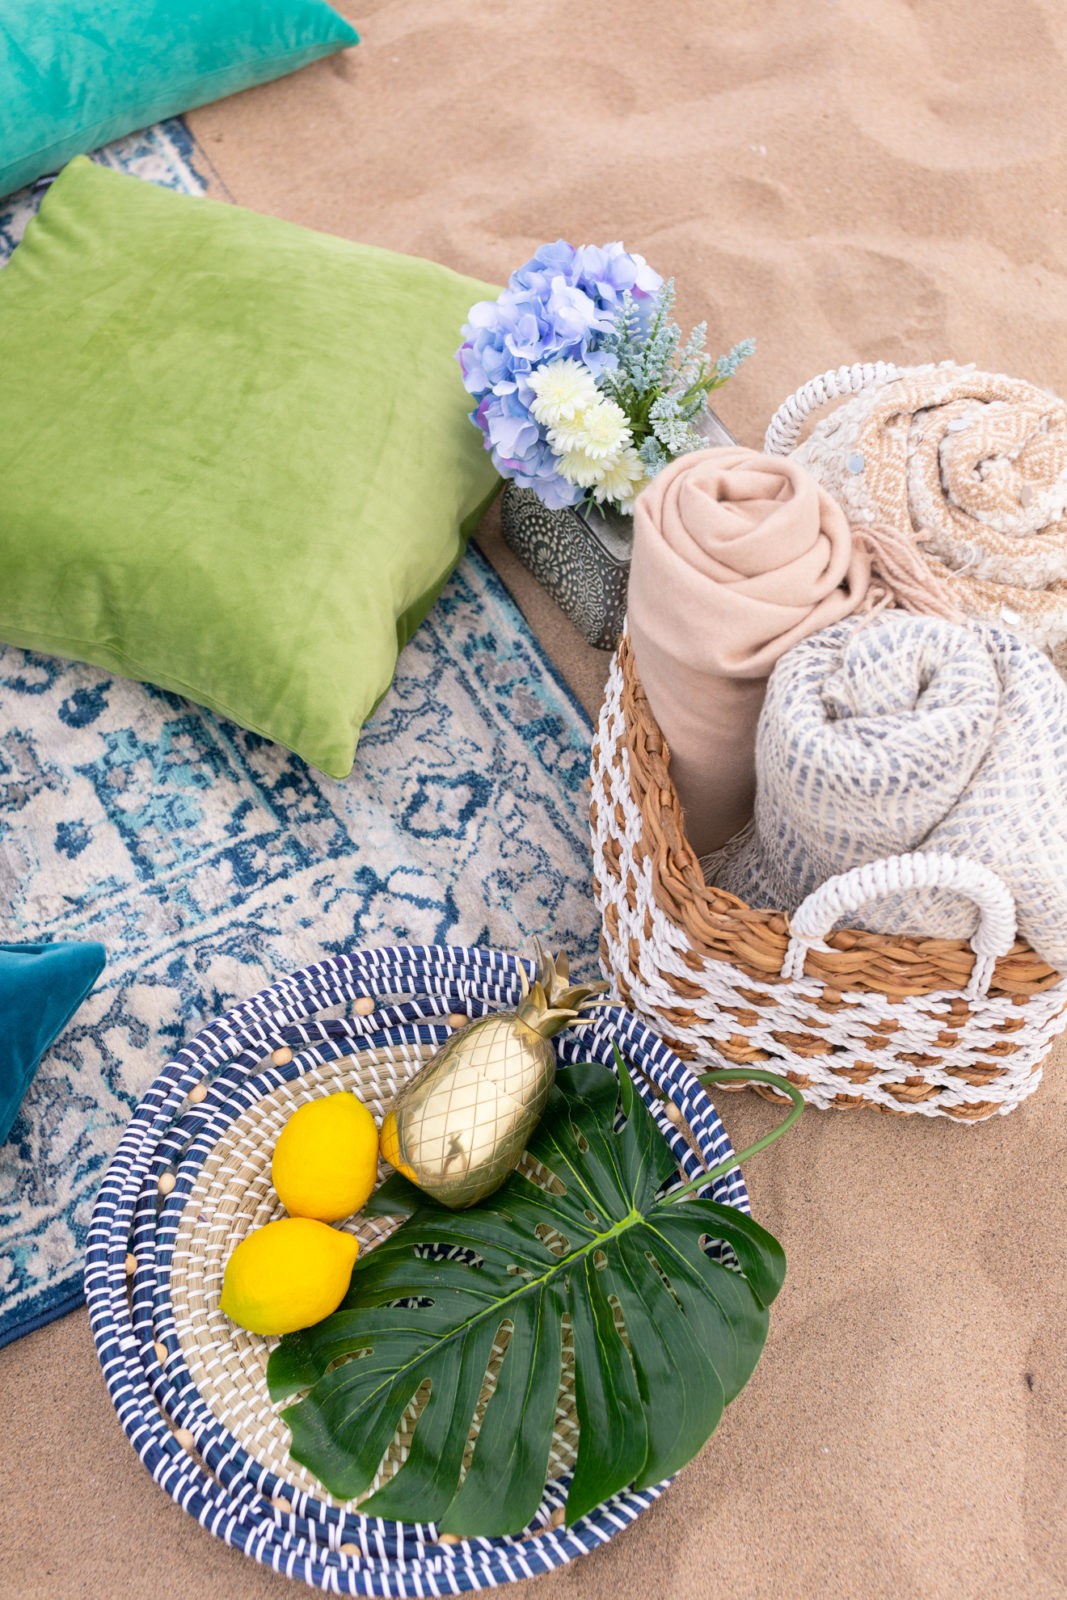 Moroccan Picnic with Atay Tea by popular California life and style blogger, Laura Lily: image of a woven basket with a palm front, lemons, and gold pineapple drink mixer, a woven basket filled with throw blankets, a blue oriental rug, and blue and green throw pillows.